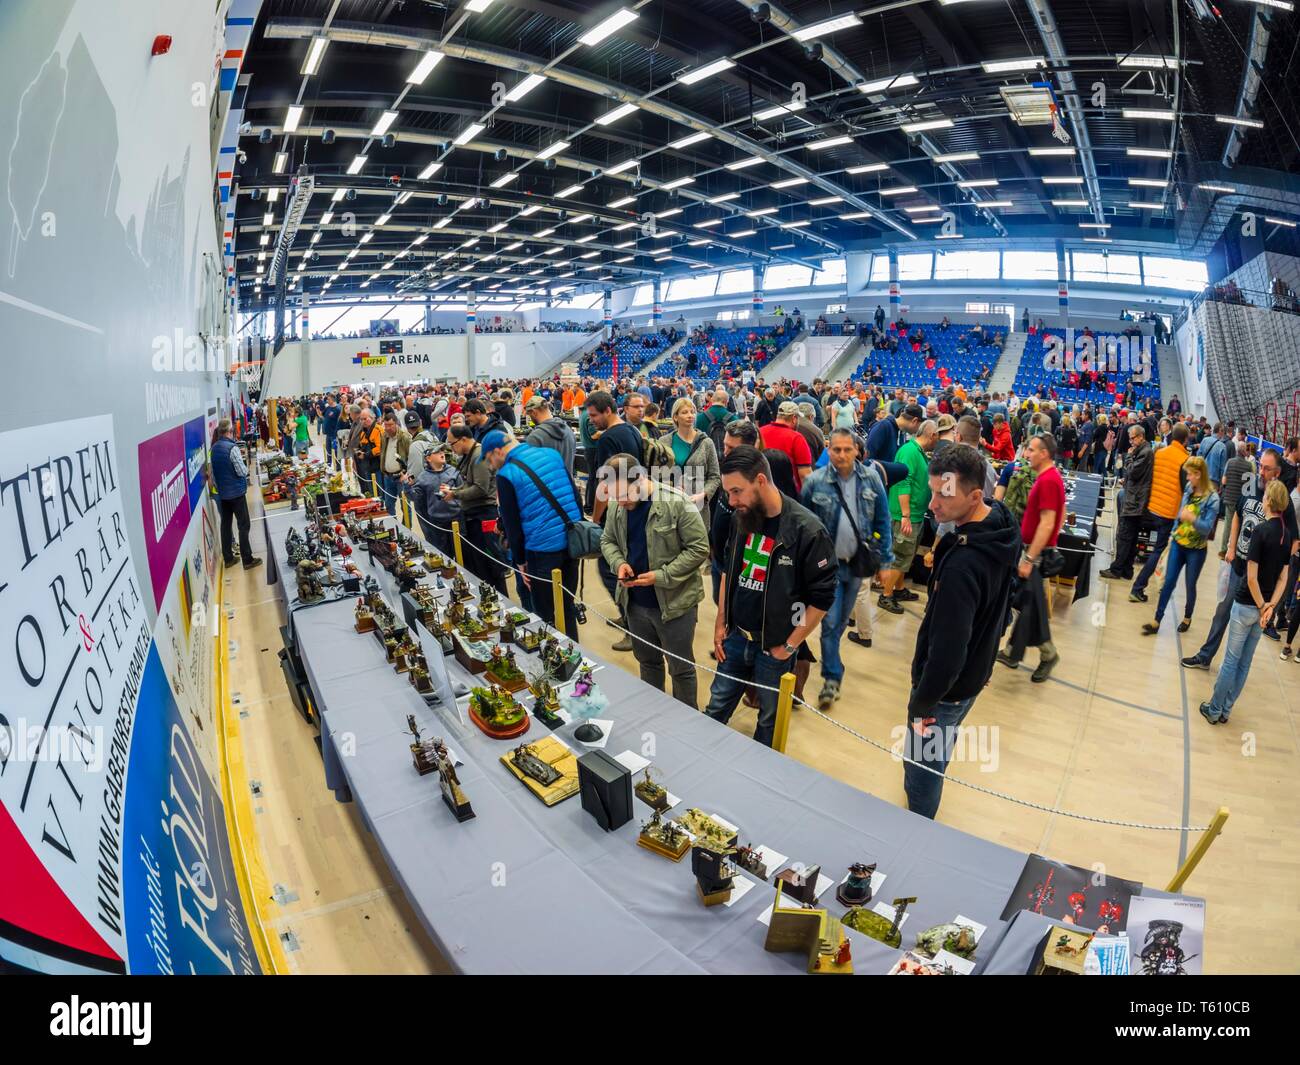 Mosonmagyarovar Hungary 2019 Moson model show plastic modeling exhibition compettition event Stock Photo